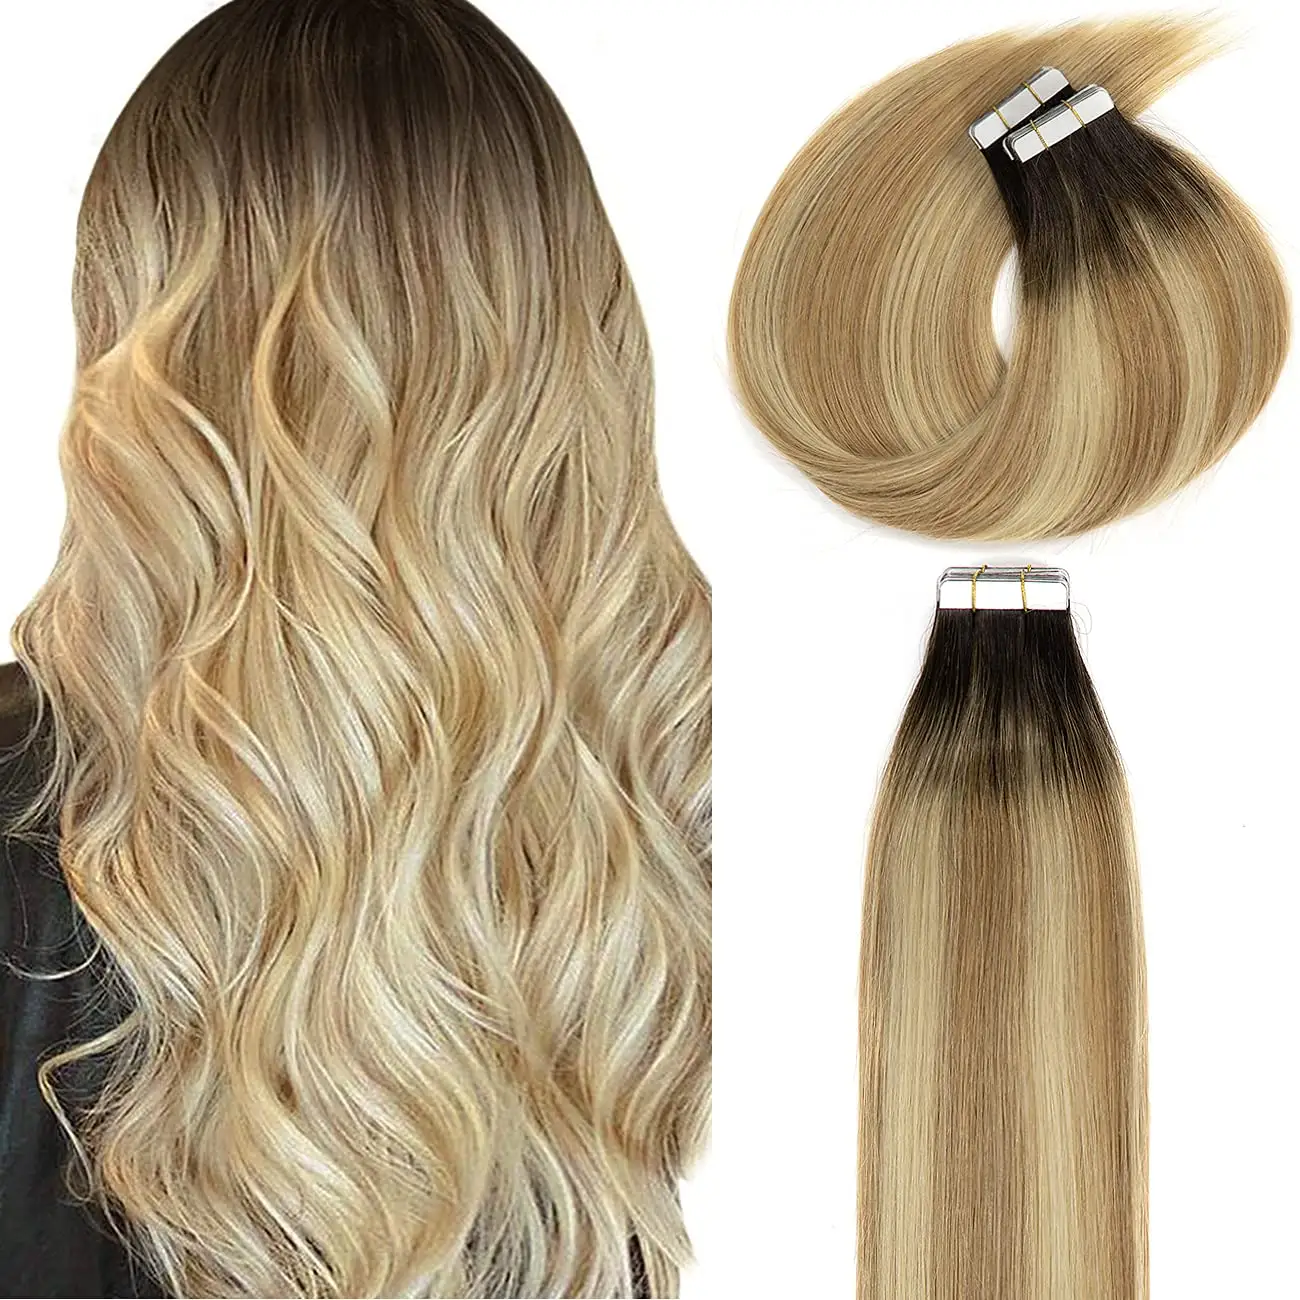 Wholesale Tape in Hair Extensions 100Human Hair from Russia Silky Smooth Double Sided Stickness Seamless Tape-in Hair extension